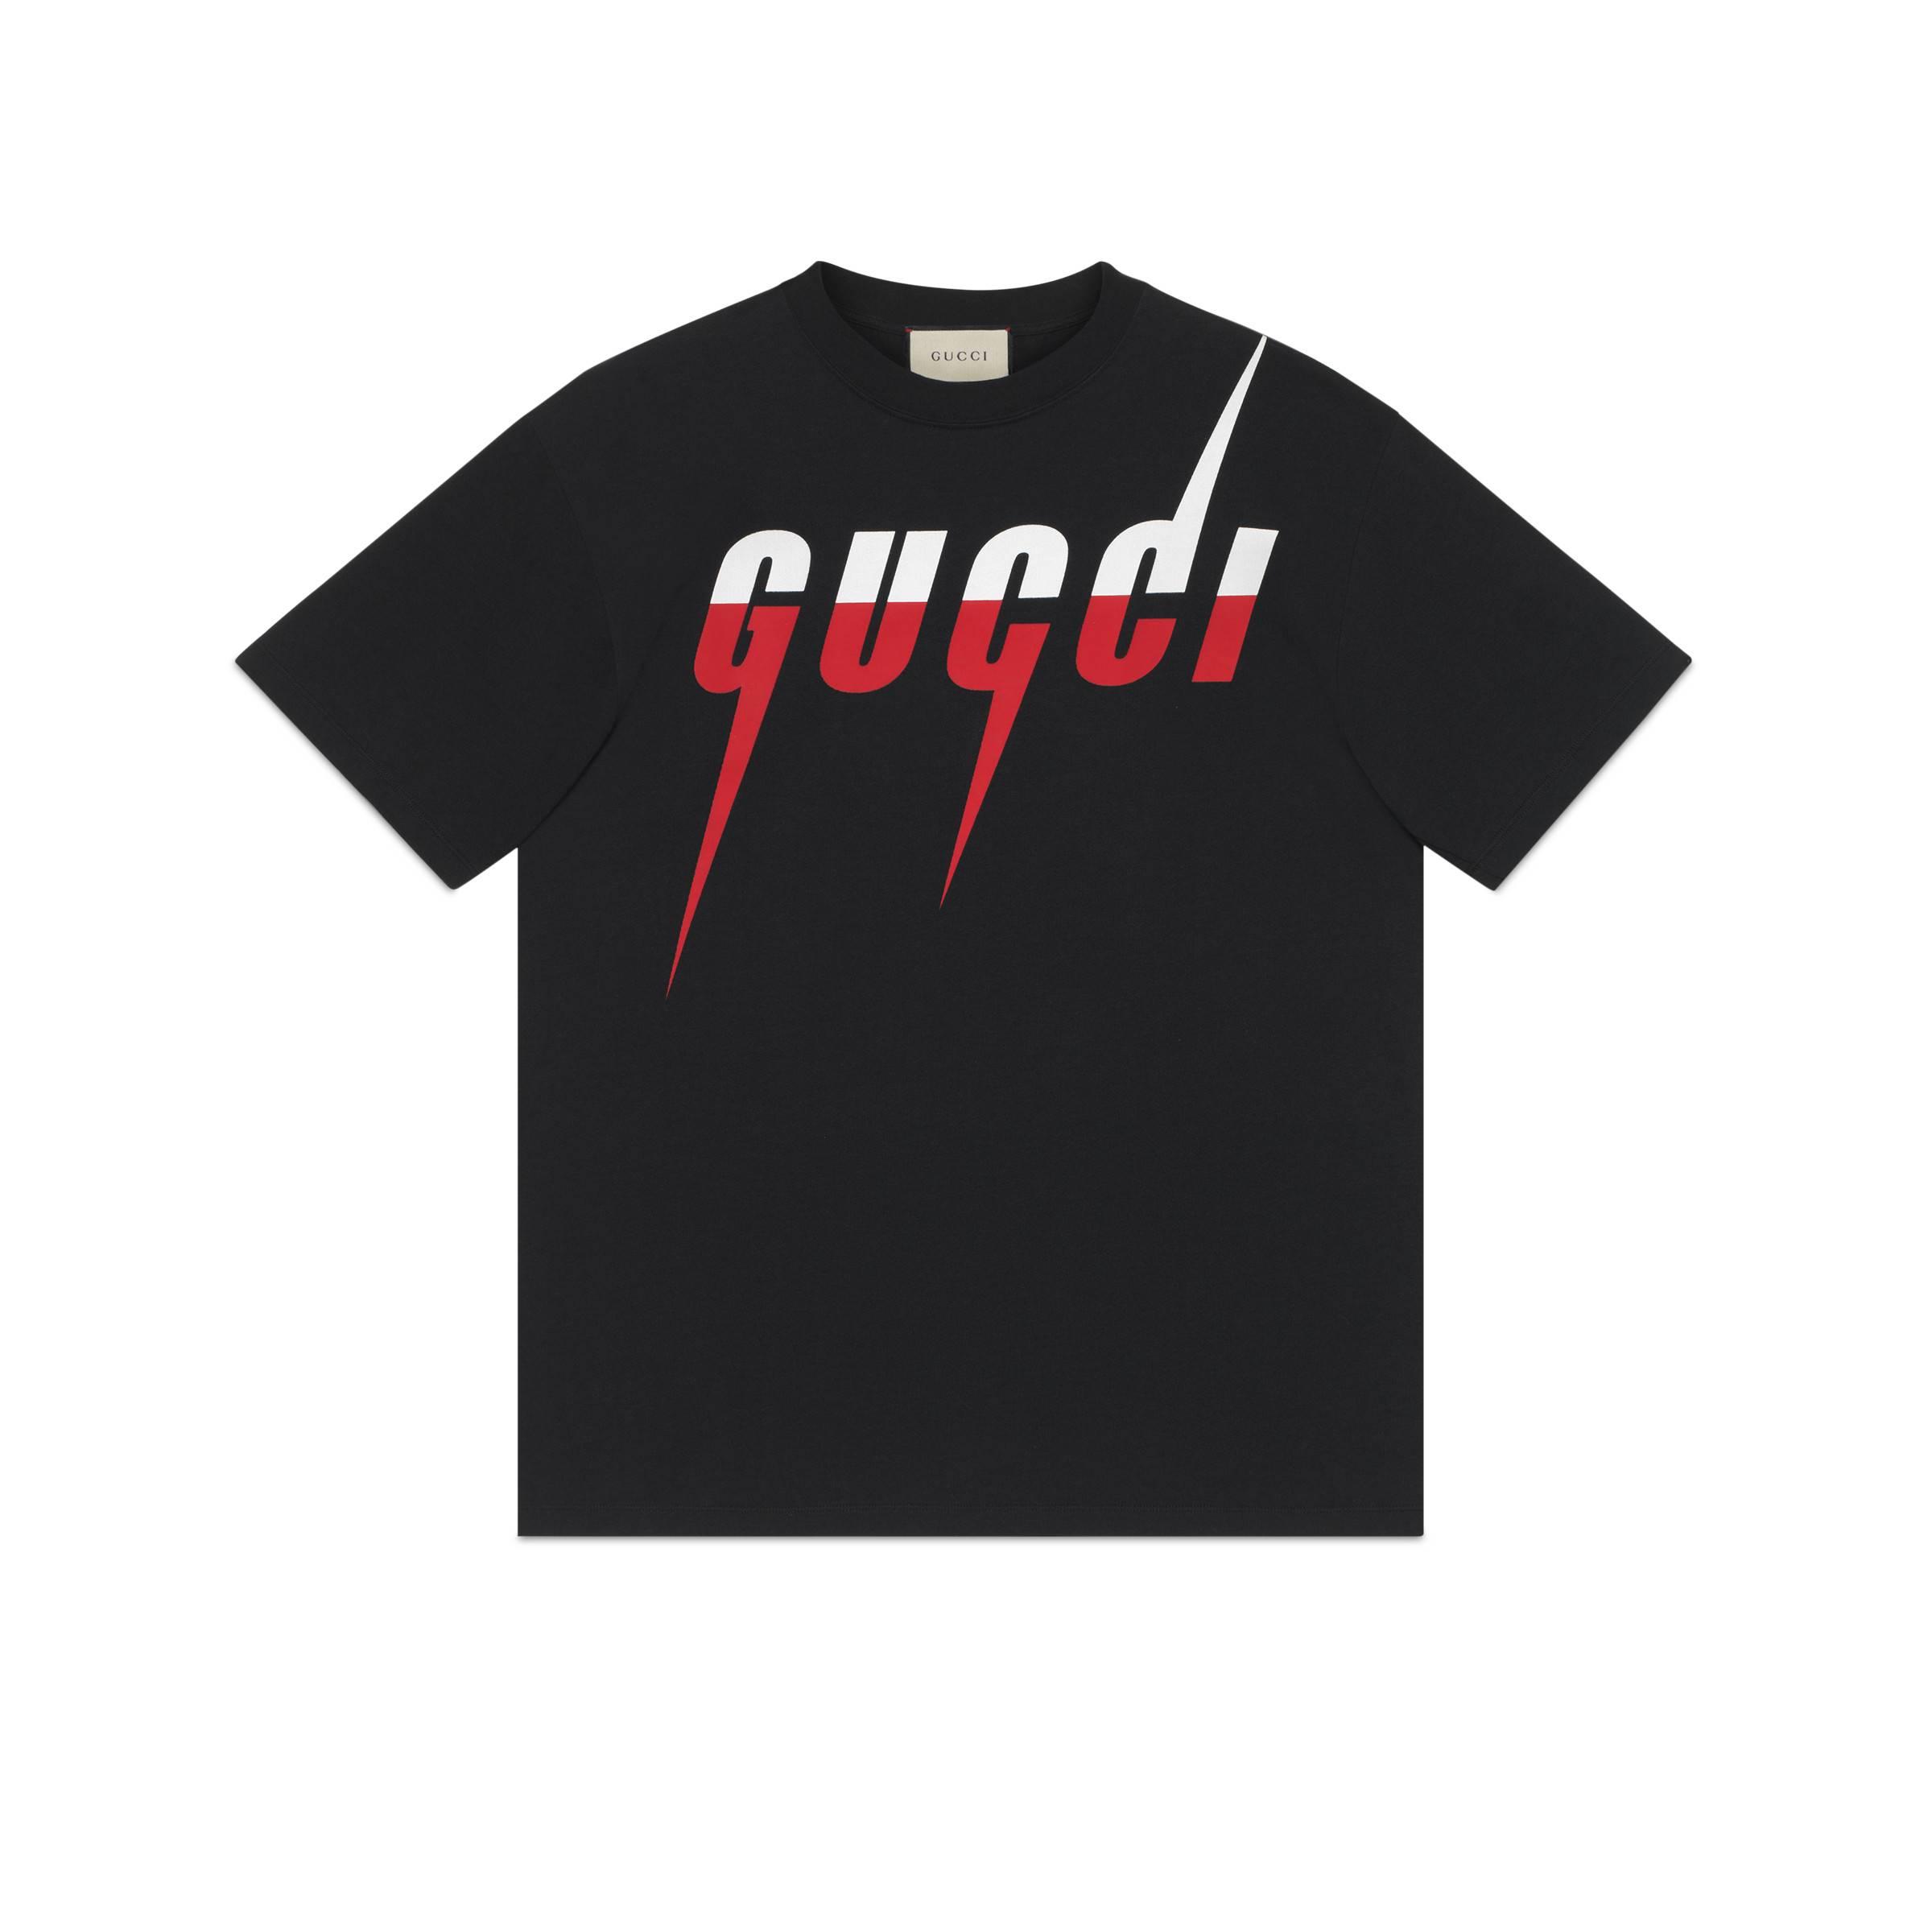 Gucci Cotton T-shirt With Blade Print in Black for Men - Save 31% - Lyst